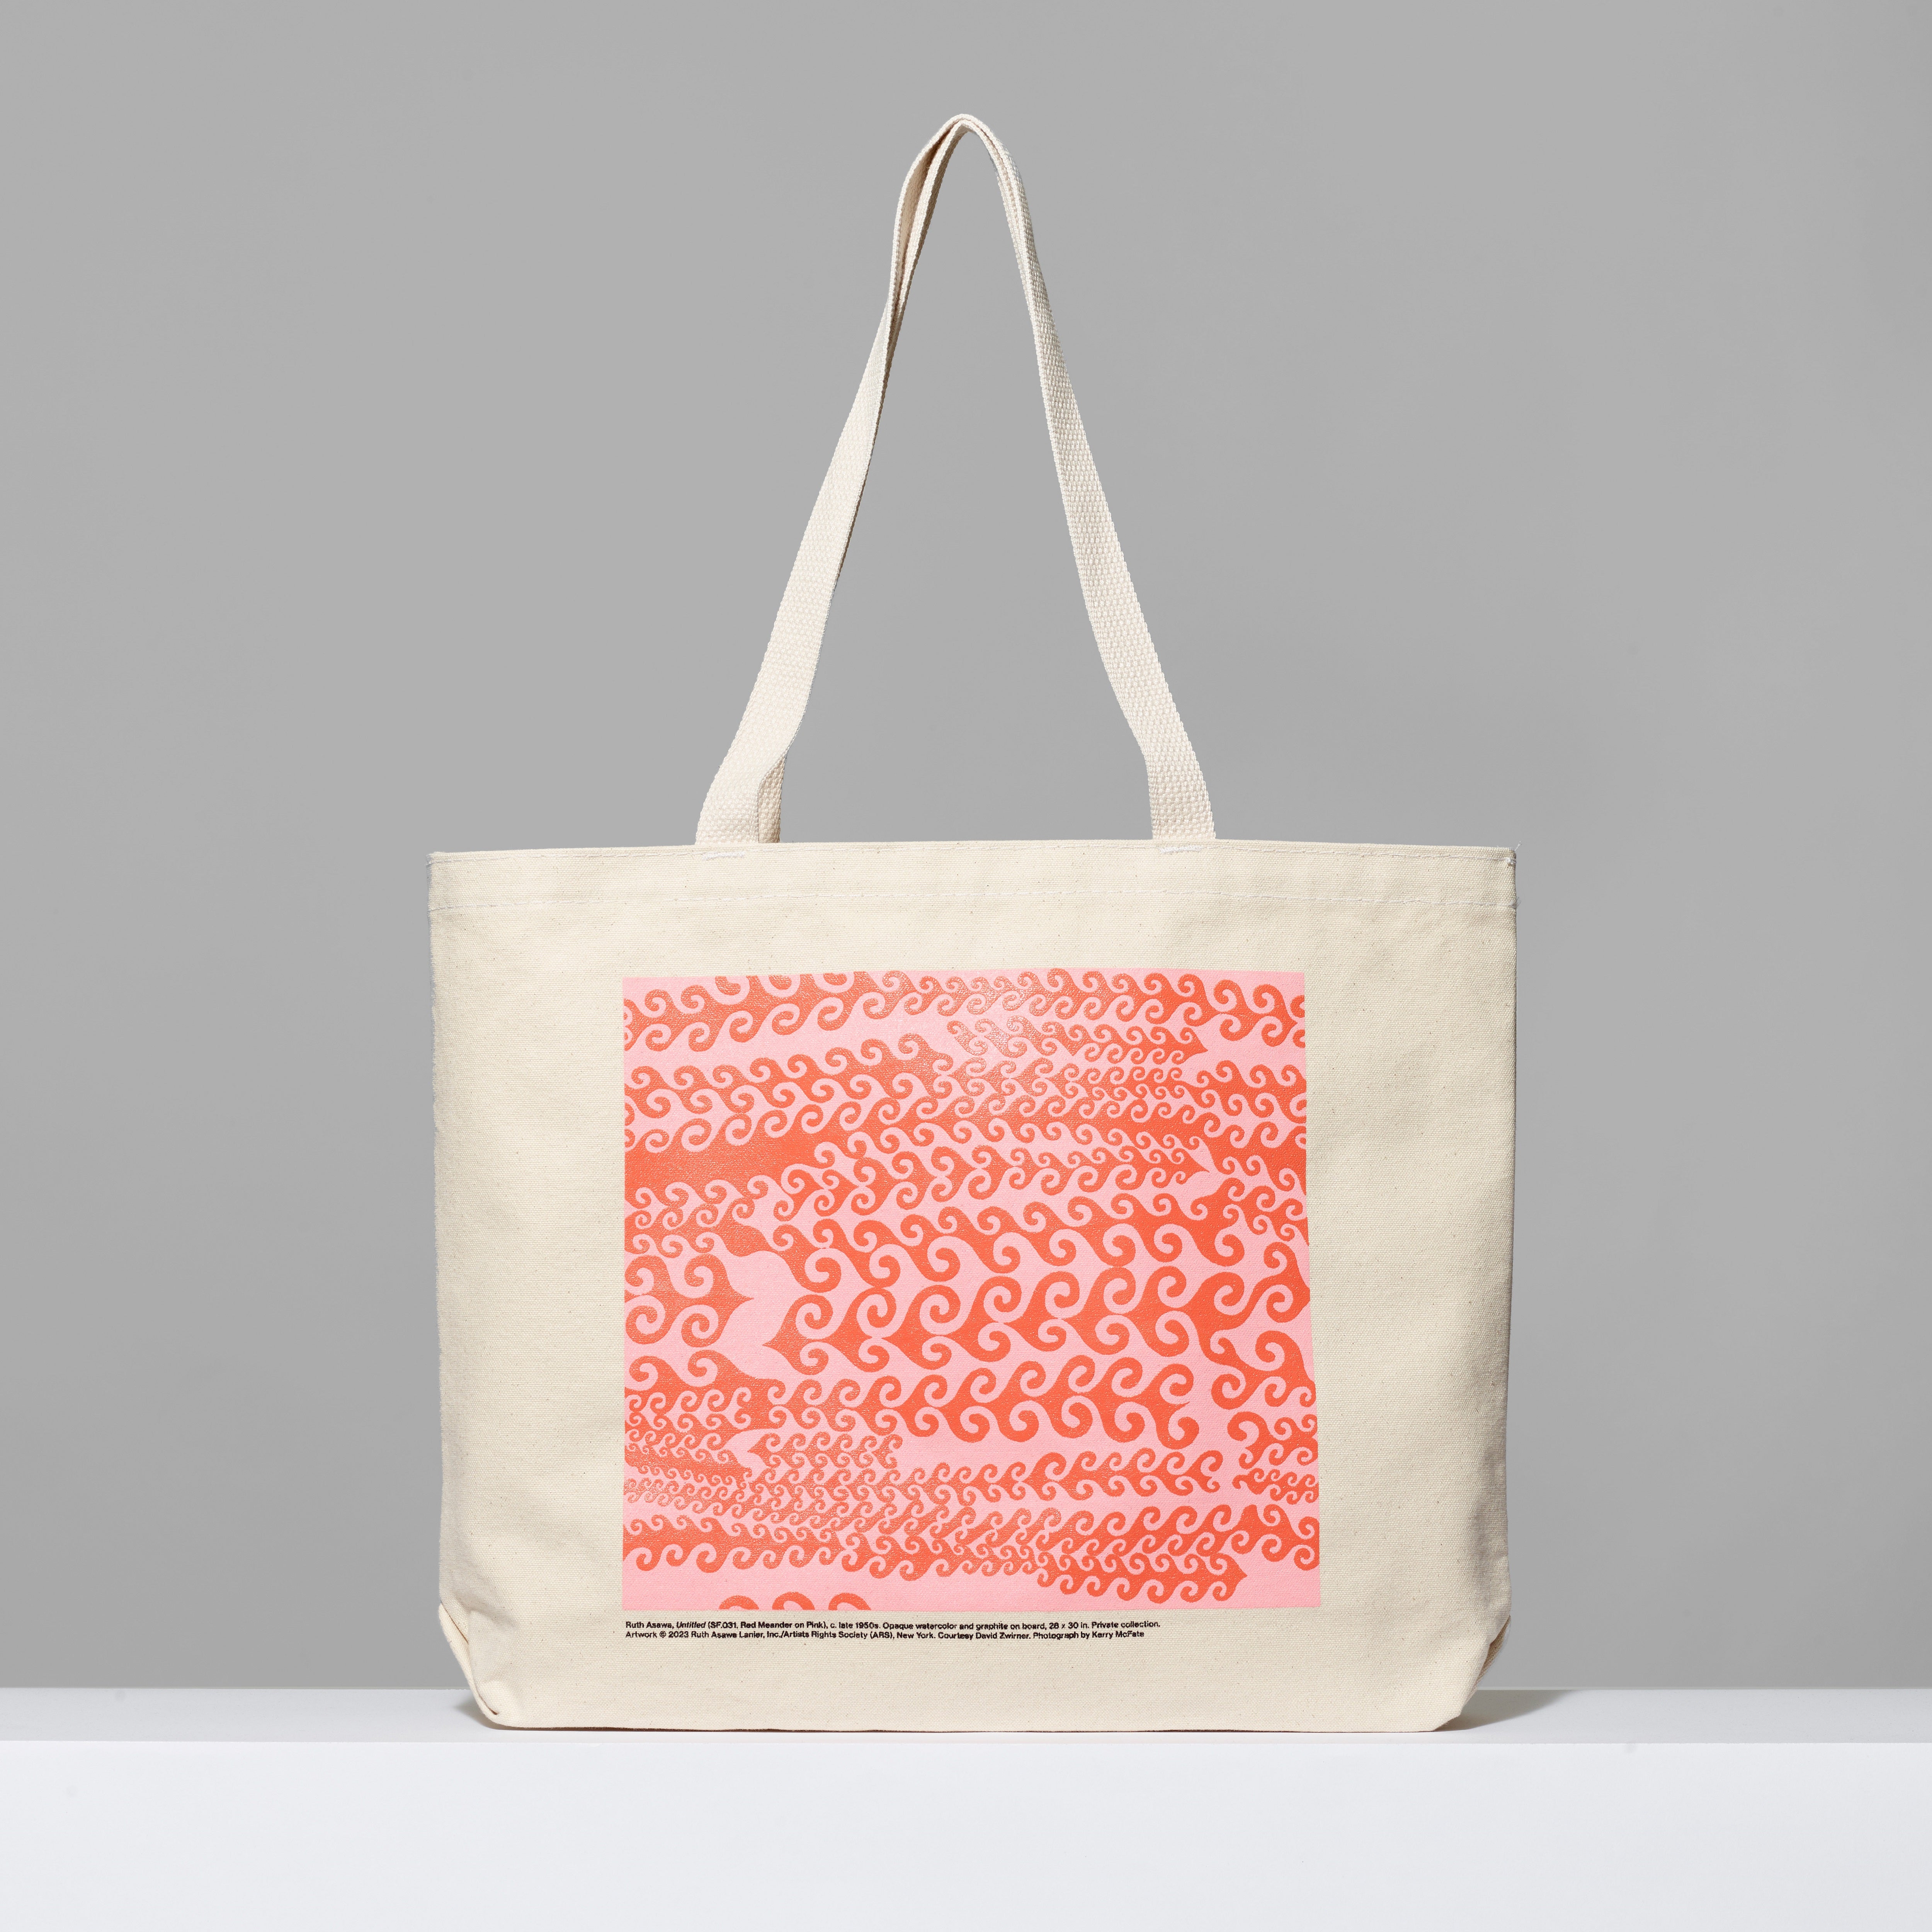 100% cotton Ruth Asawa Through Line Tote featuring Untitled (SF .031, Red Meander on Pink). Measures 18" x 14". 3.5" gusset, 11" handles.